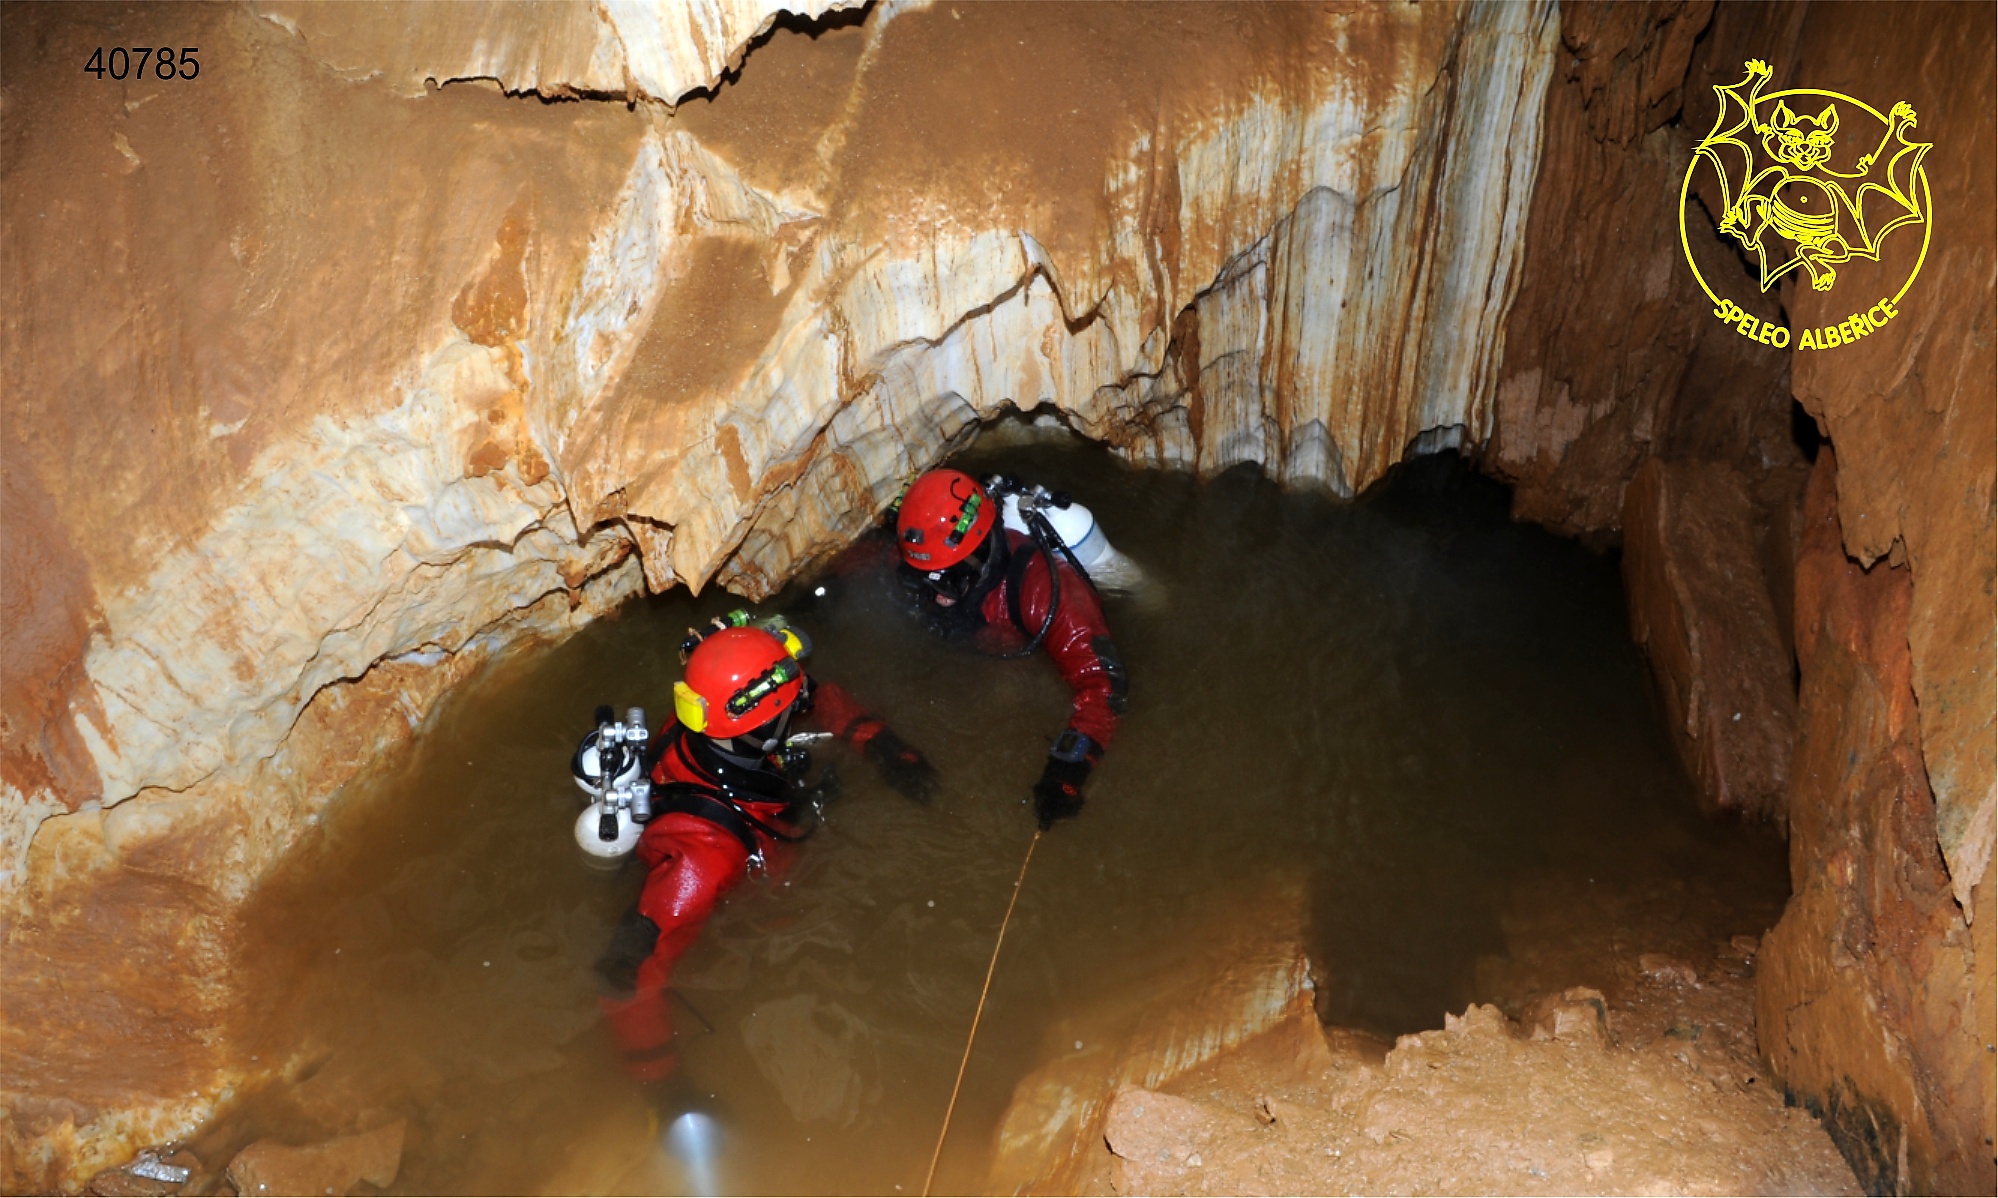 Diving exploration in the Marble Cave - enlarge by clicking